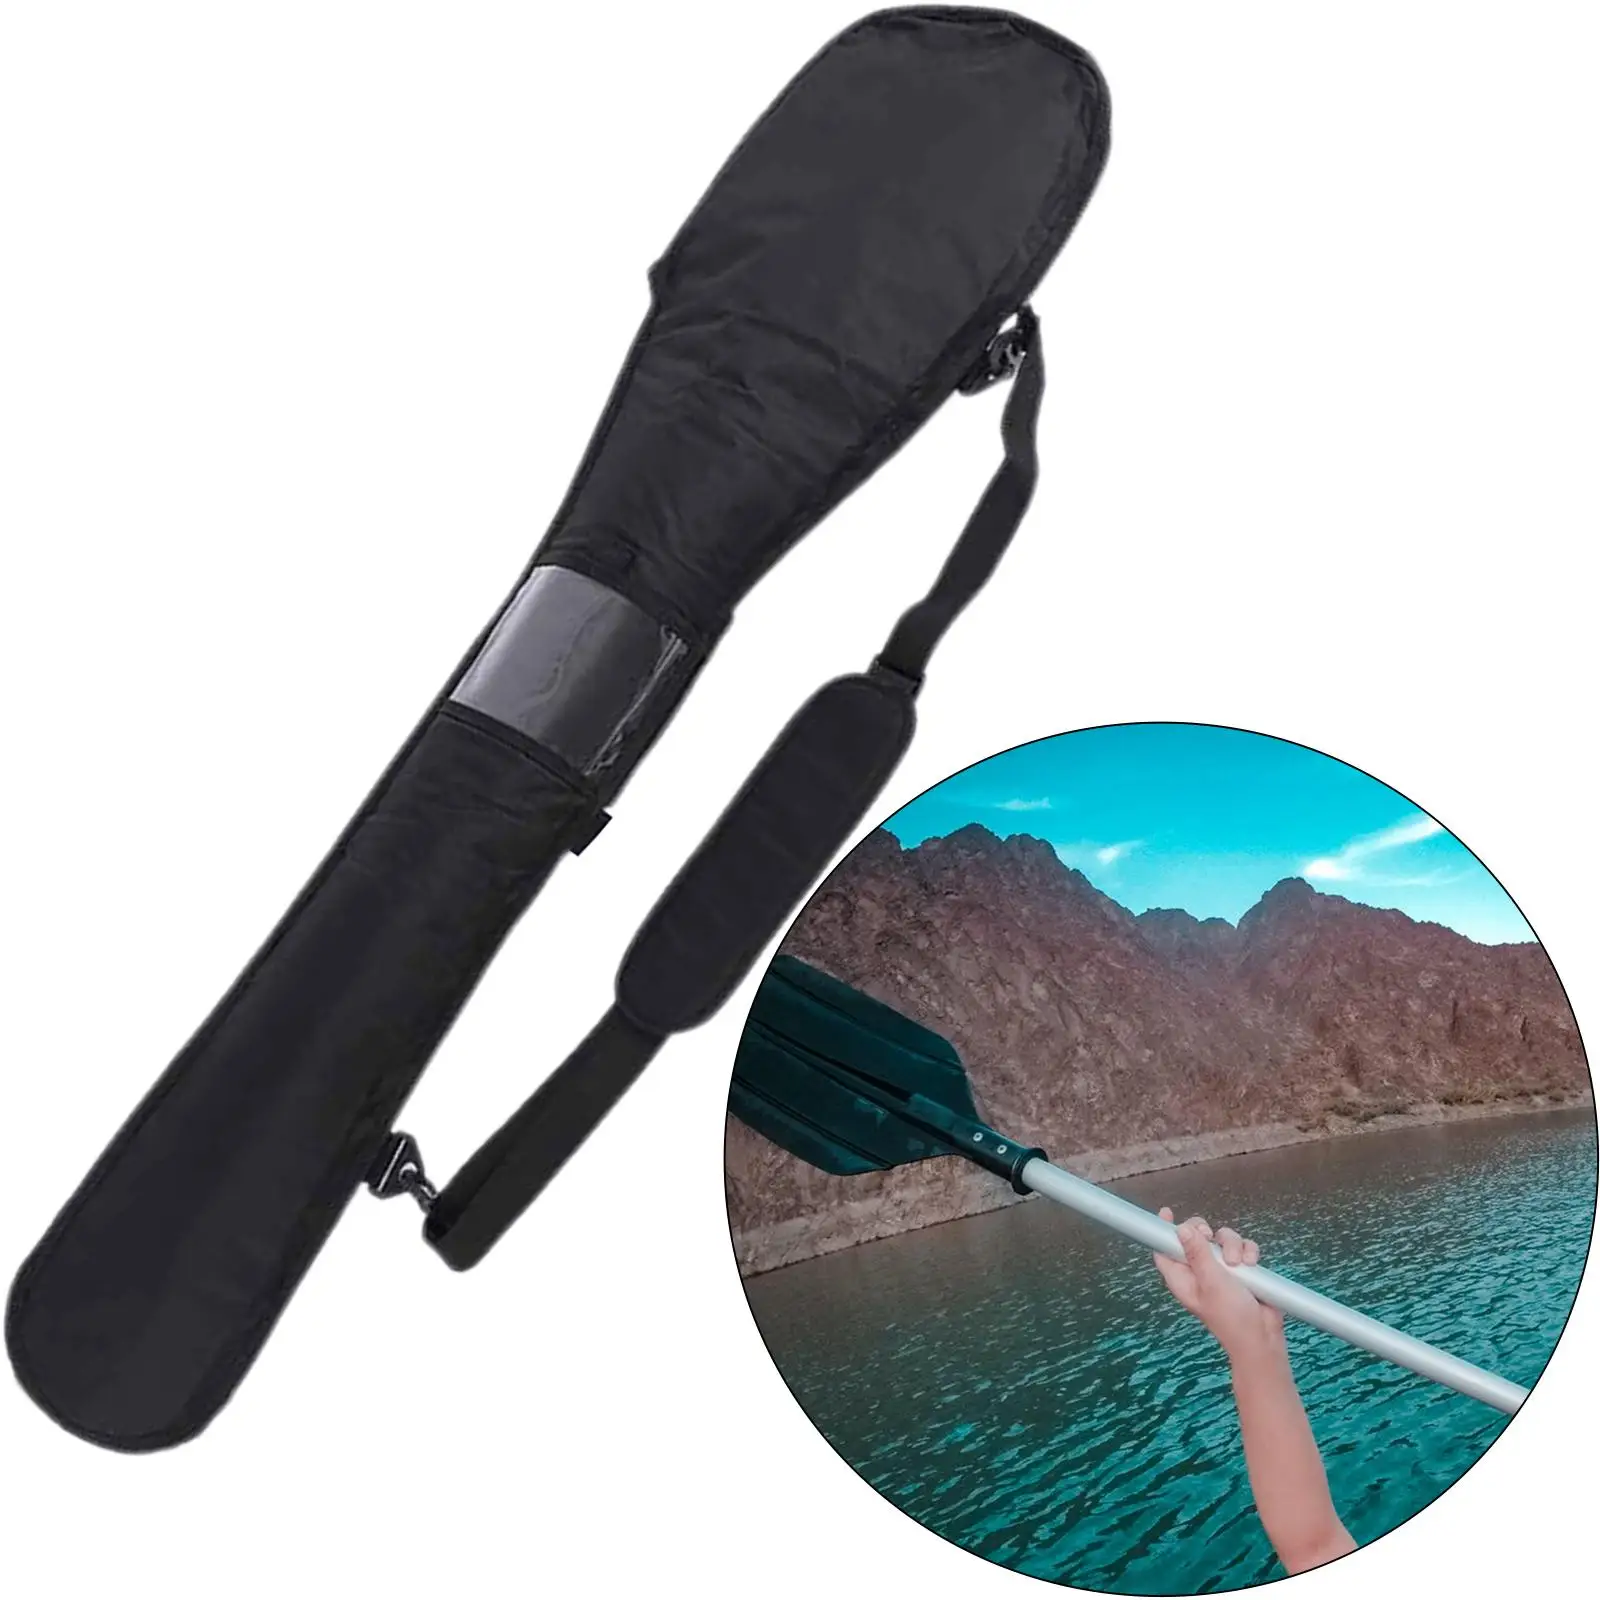 Paddle Pouch Pocket Carrying Board Storage Pouch for Rafting Kayak Stand up Paddle Board